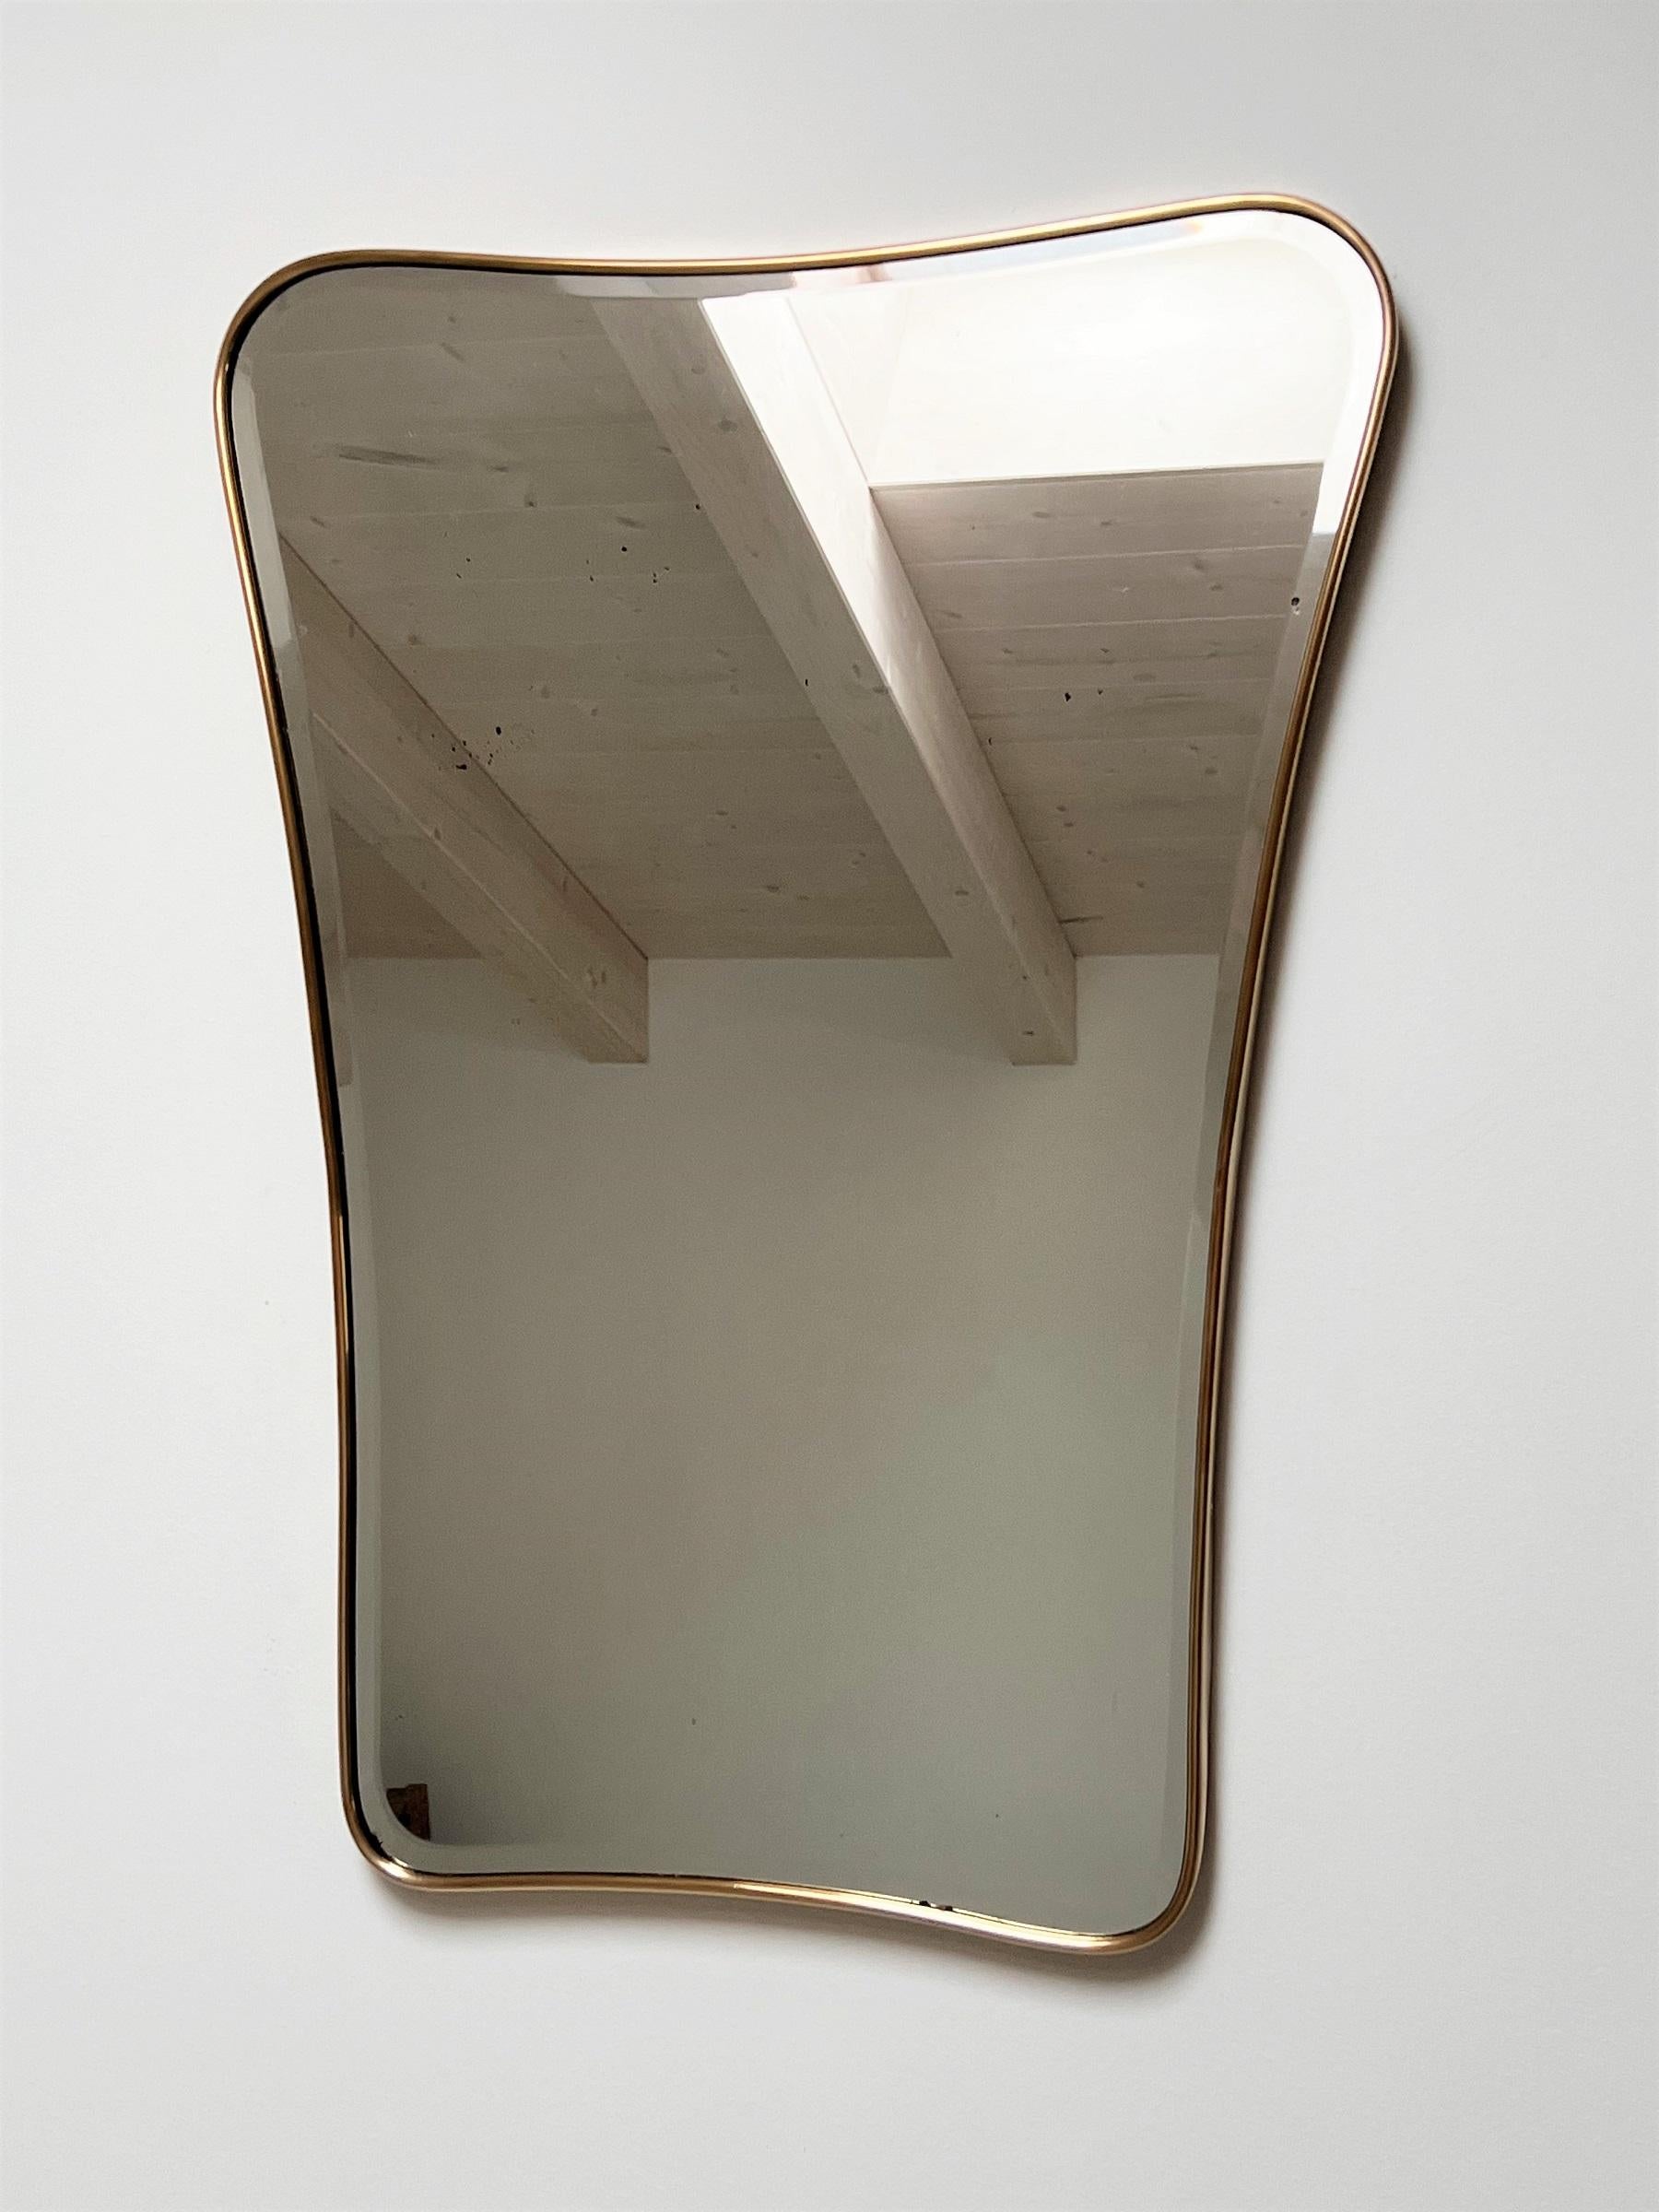 Late 20th Century Italian Large Midcentury Vintage Wall Mirror with Cut Glass and Brass Frame For Sale